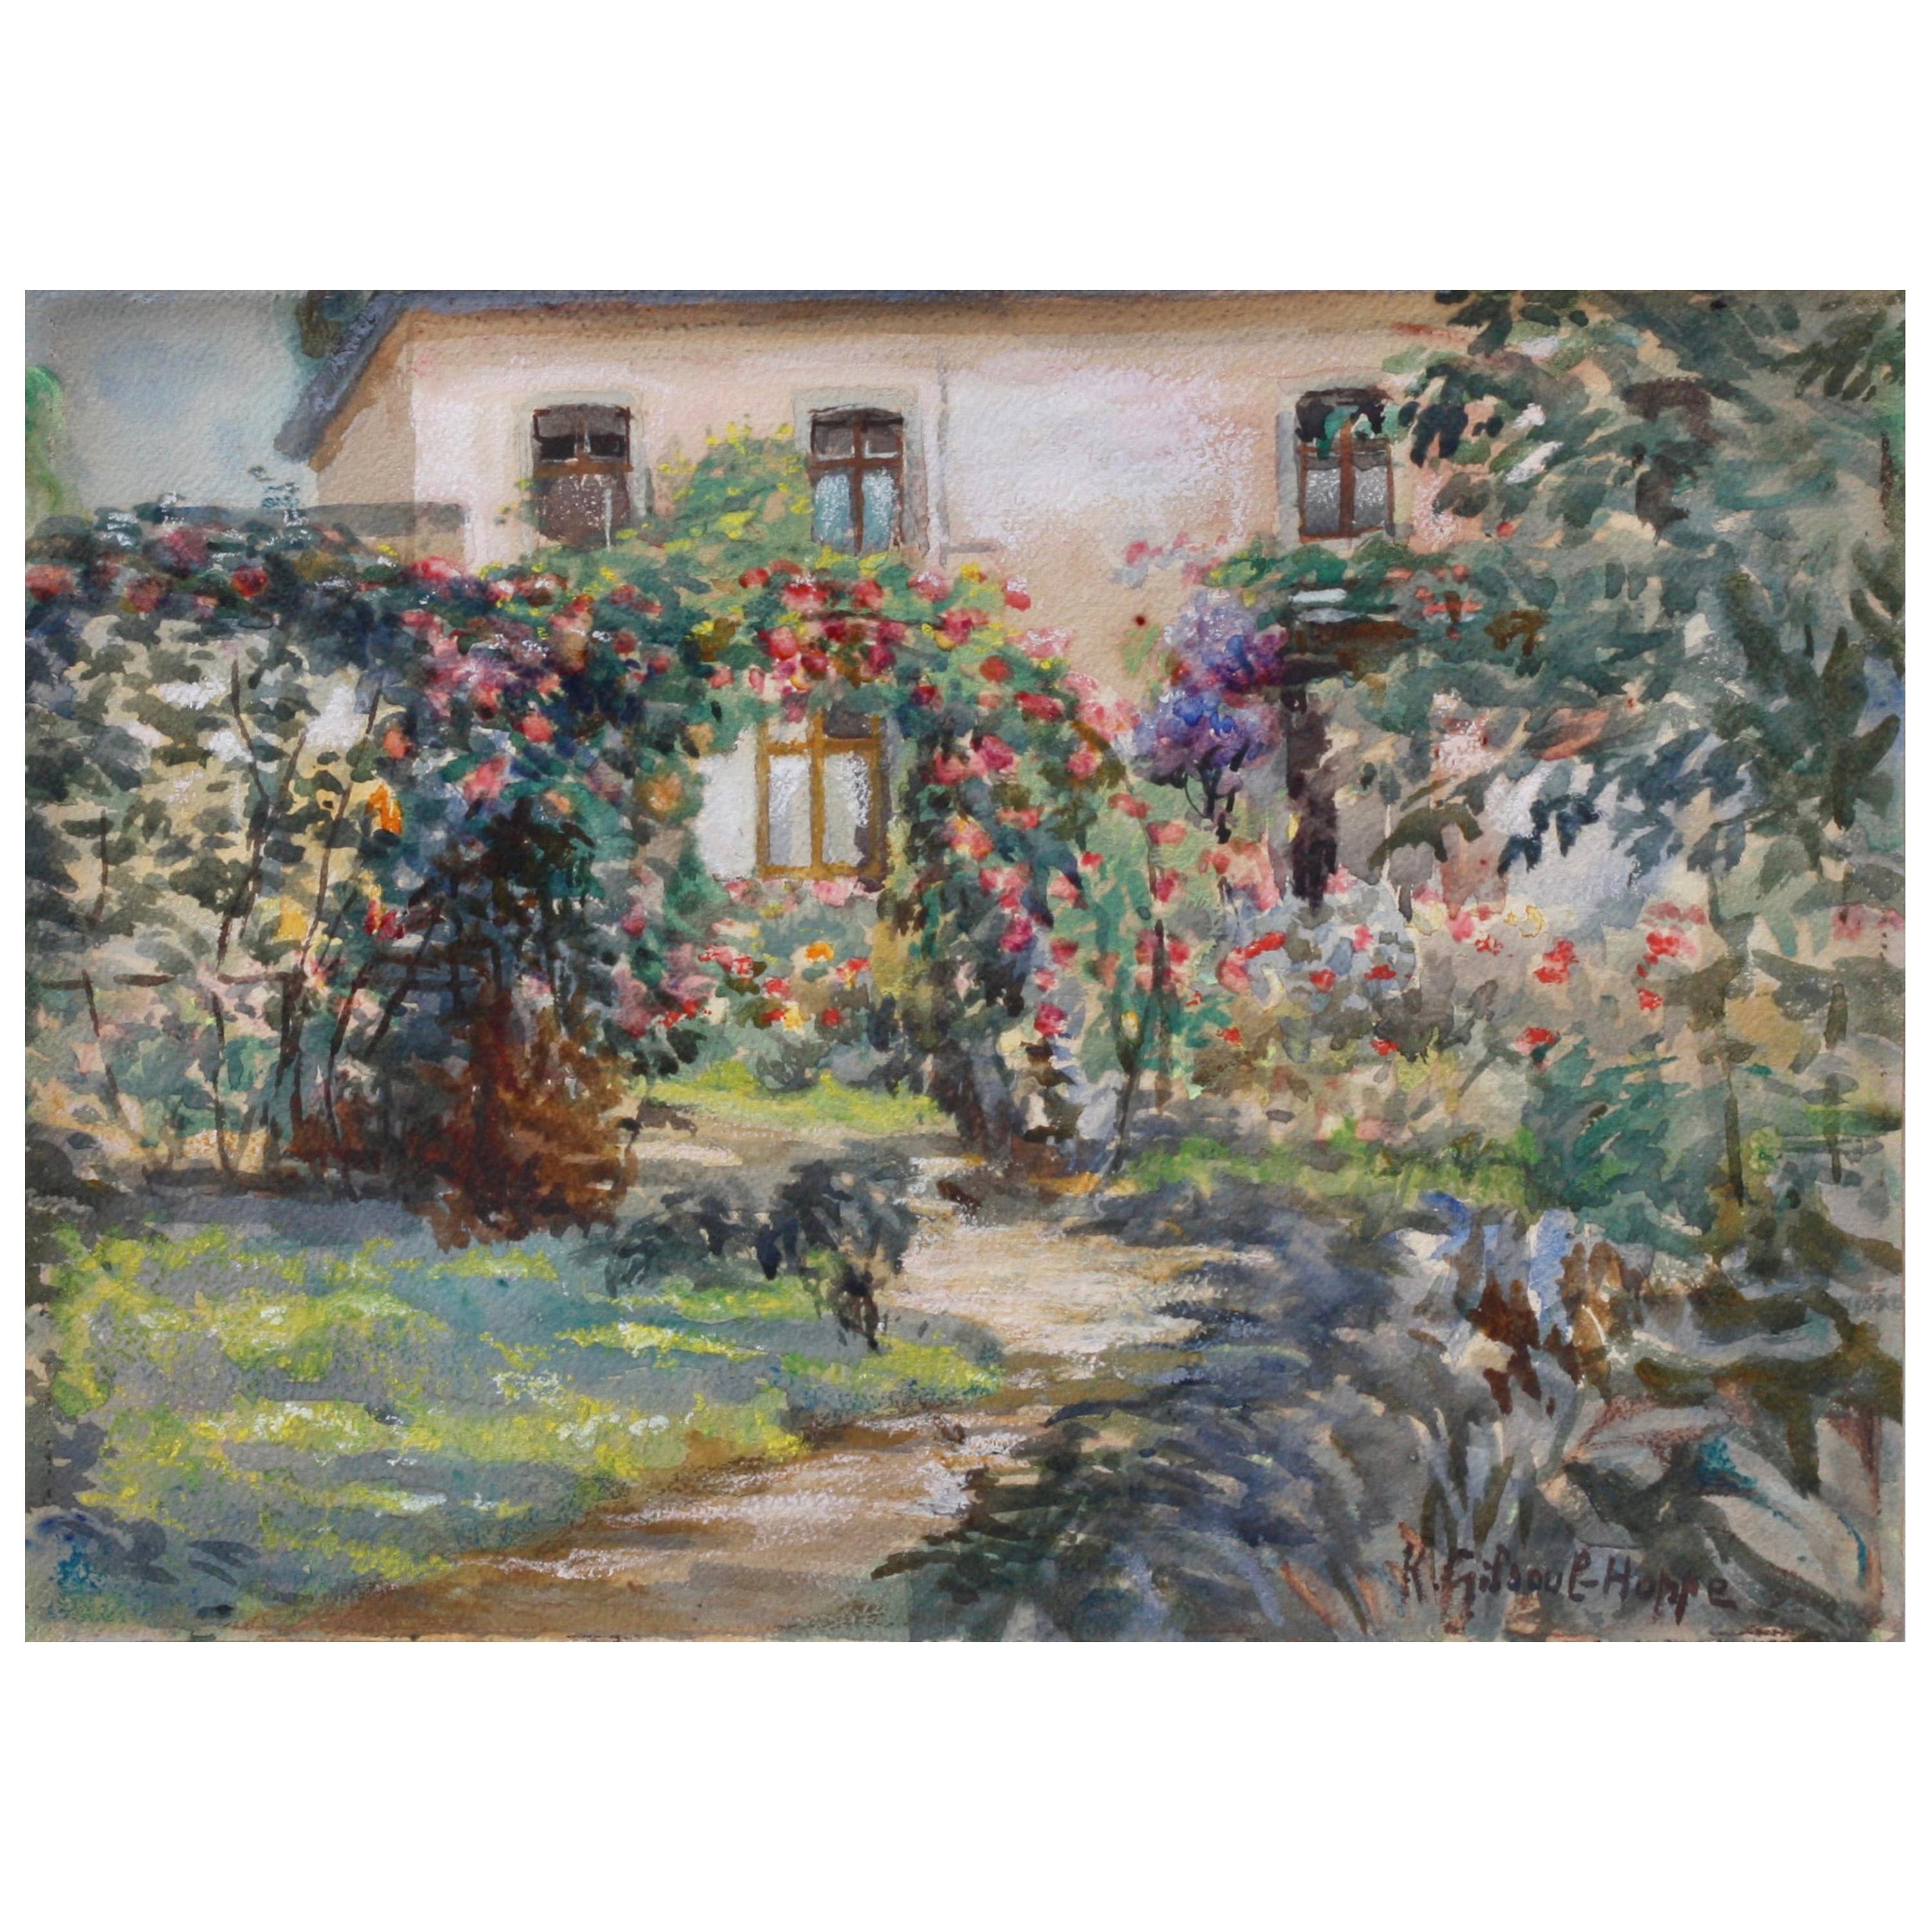 "Garden Scene" Ink and Watercolor Drawing, Signed Lower Right "K Gilsoul-Hoppe"